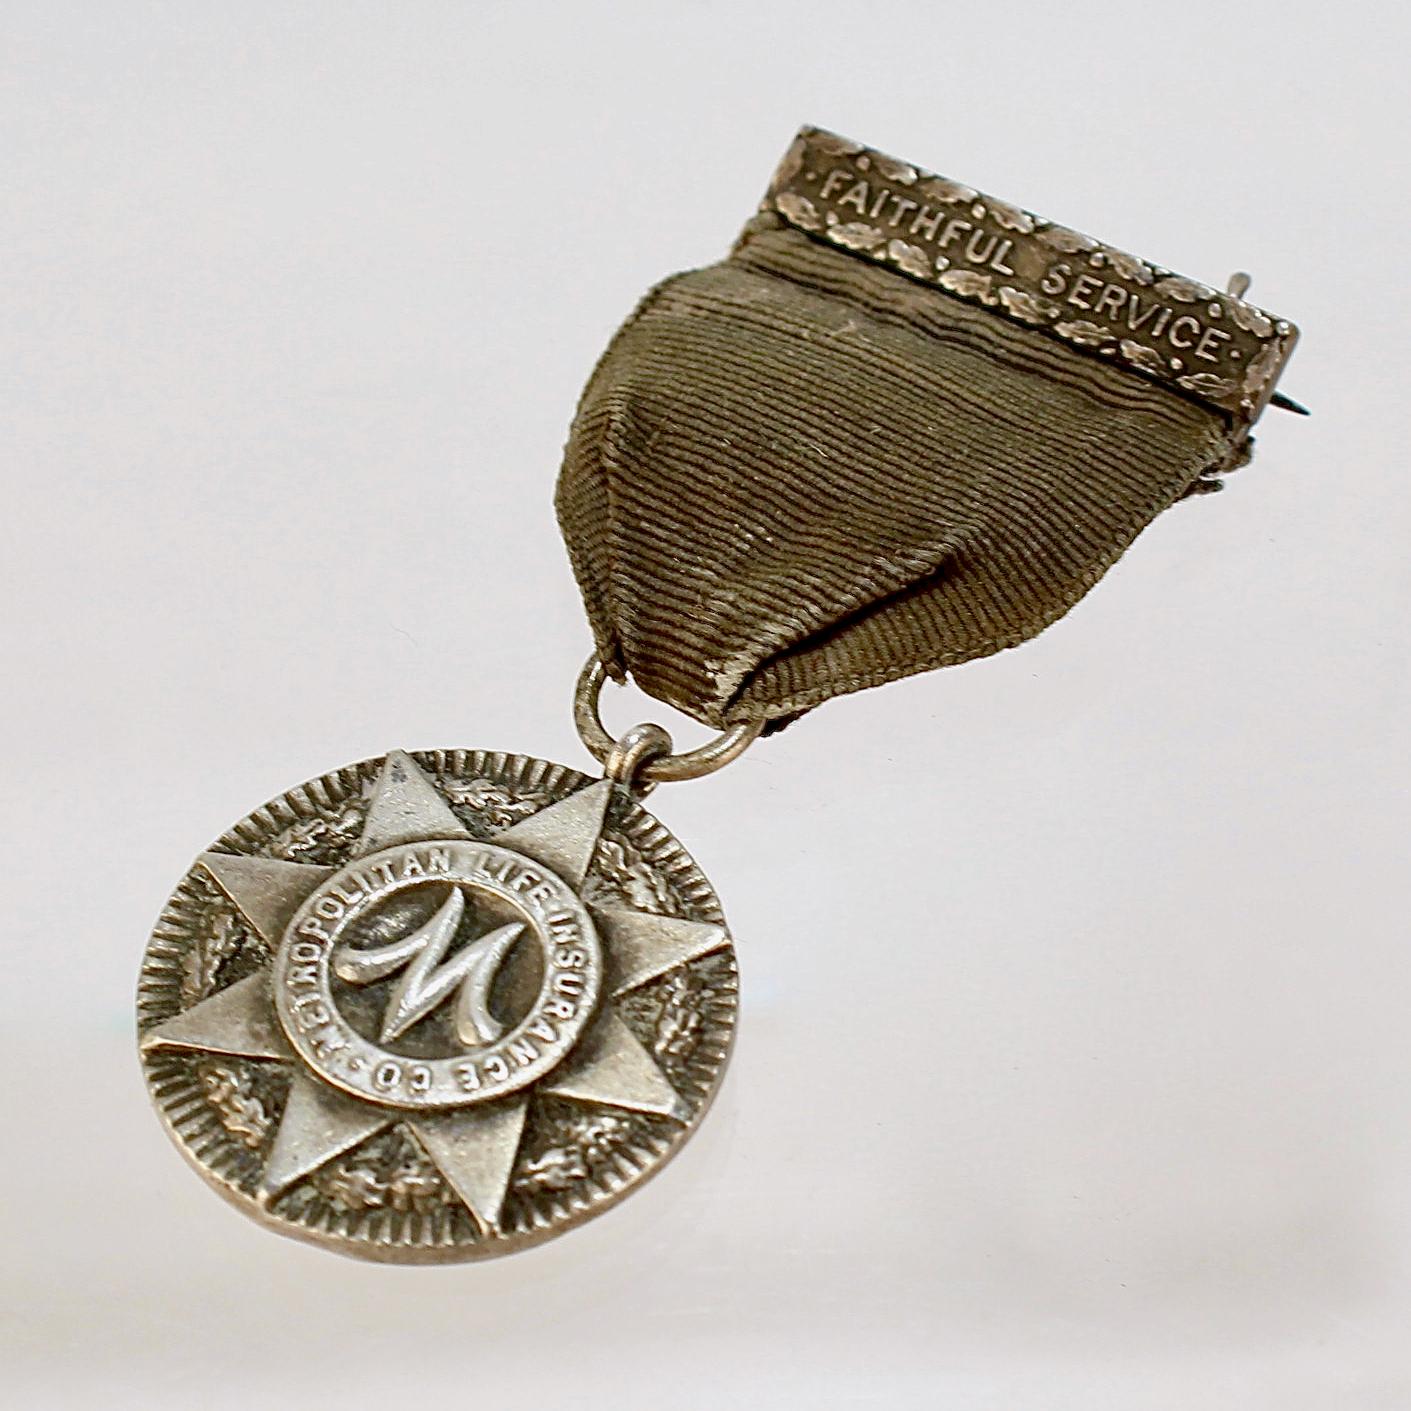 A fine sterling silver service medal for the Metropolitan Life Insurance Company.

Made by Tiffany & Co. 

Presented for faithful service. 

Simply a wonderful artifact from days gone by from Tiffany & Co.!

Date:
Early 20th Century

Overall